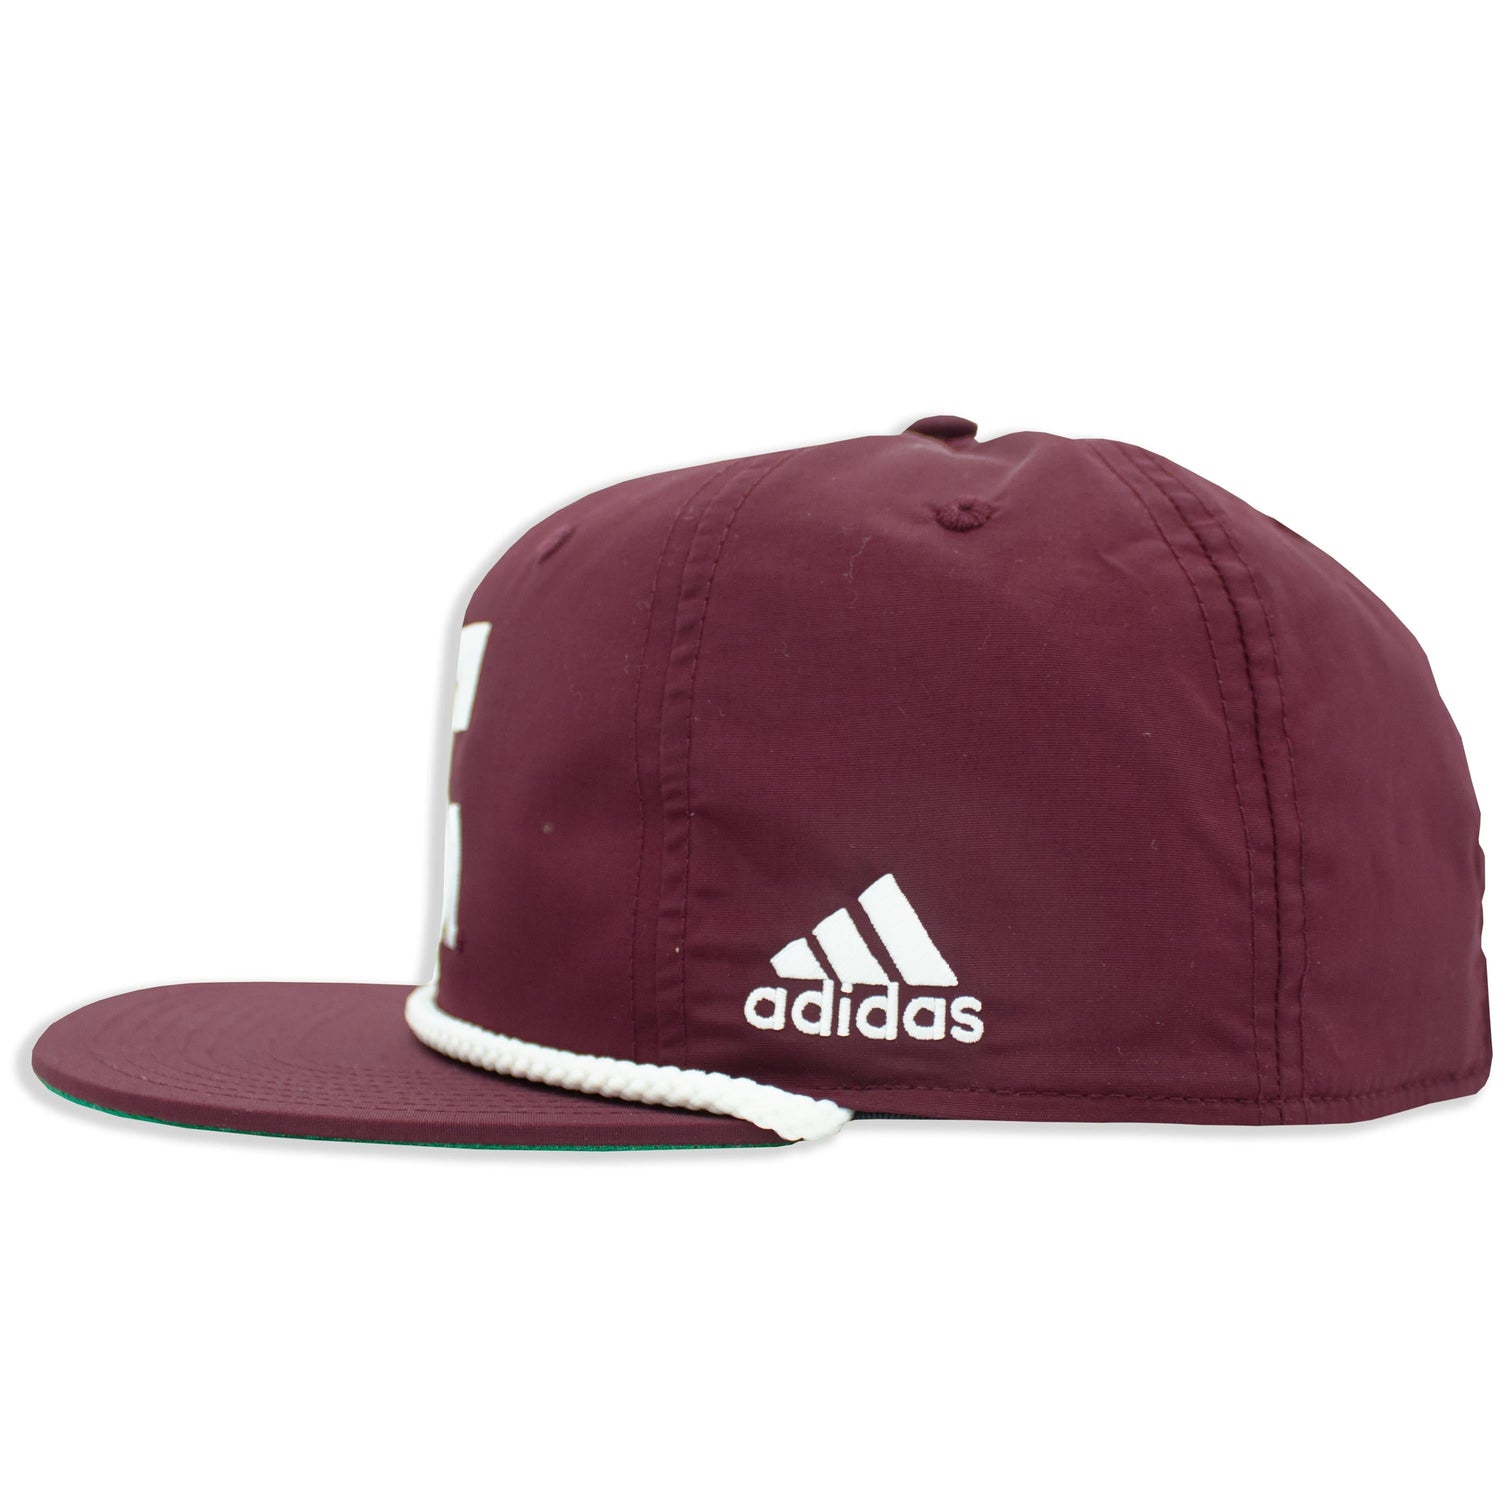 Texas A&M Adidas Rope Adjustable Hat